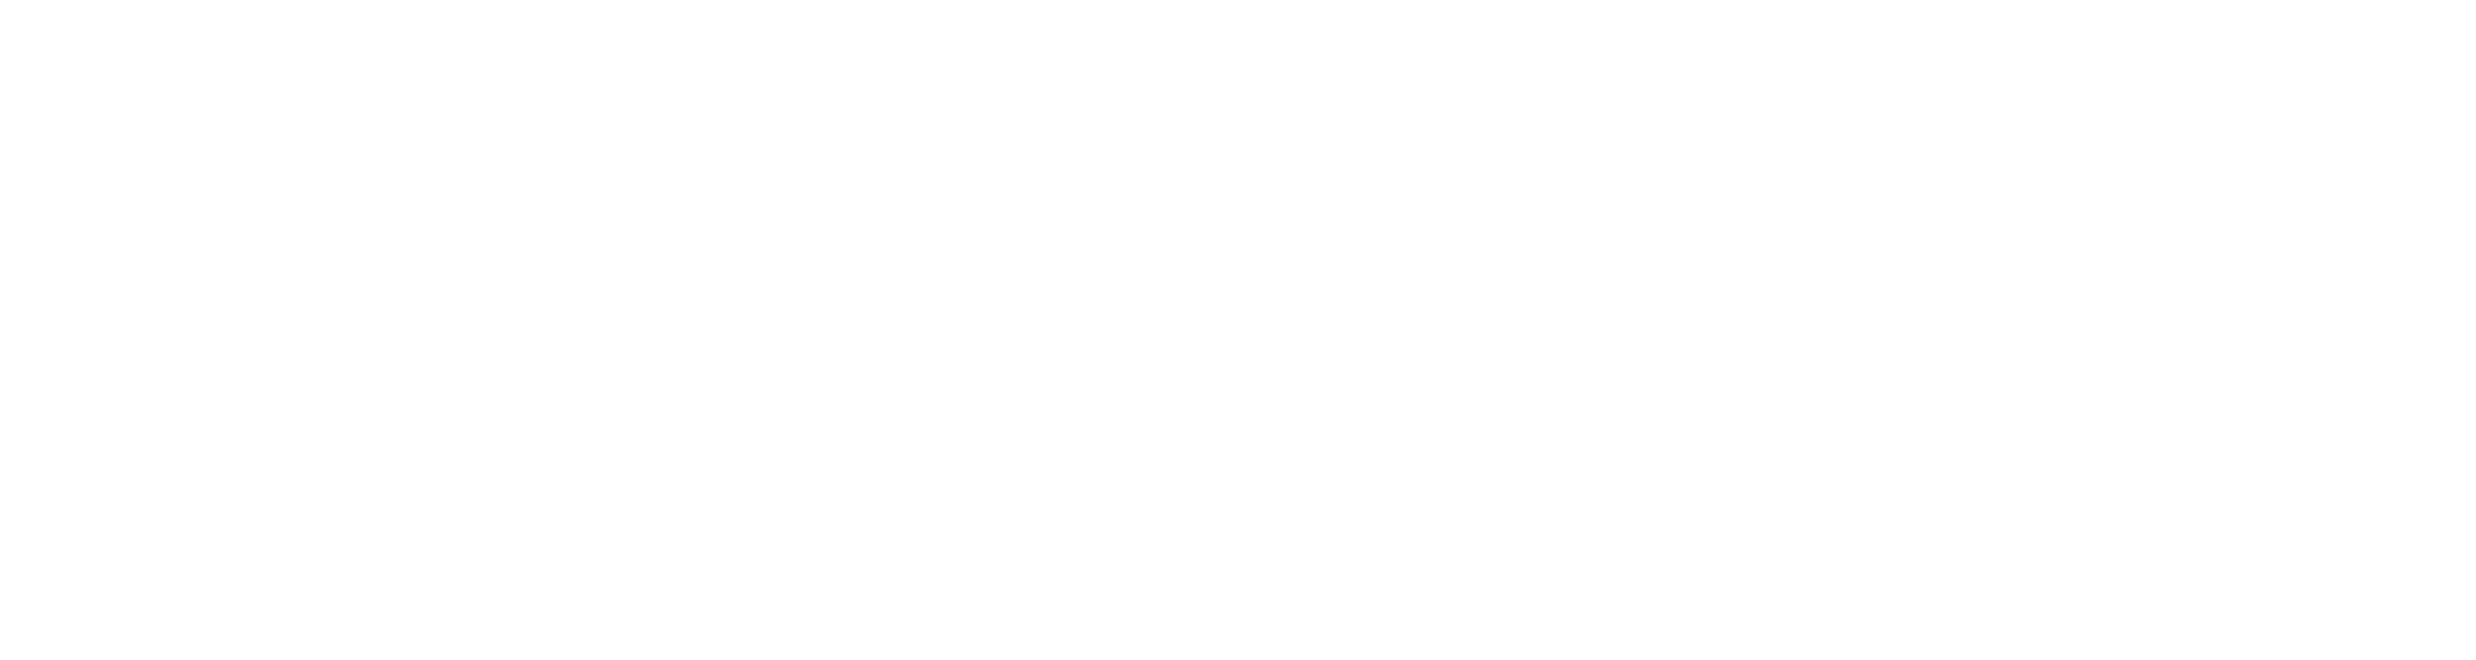 Colorado Local Science Engagement Network